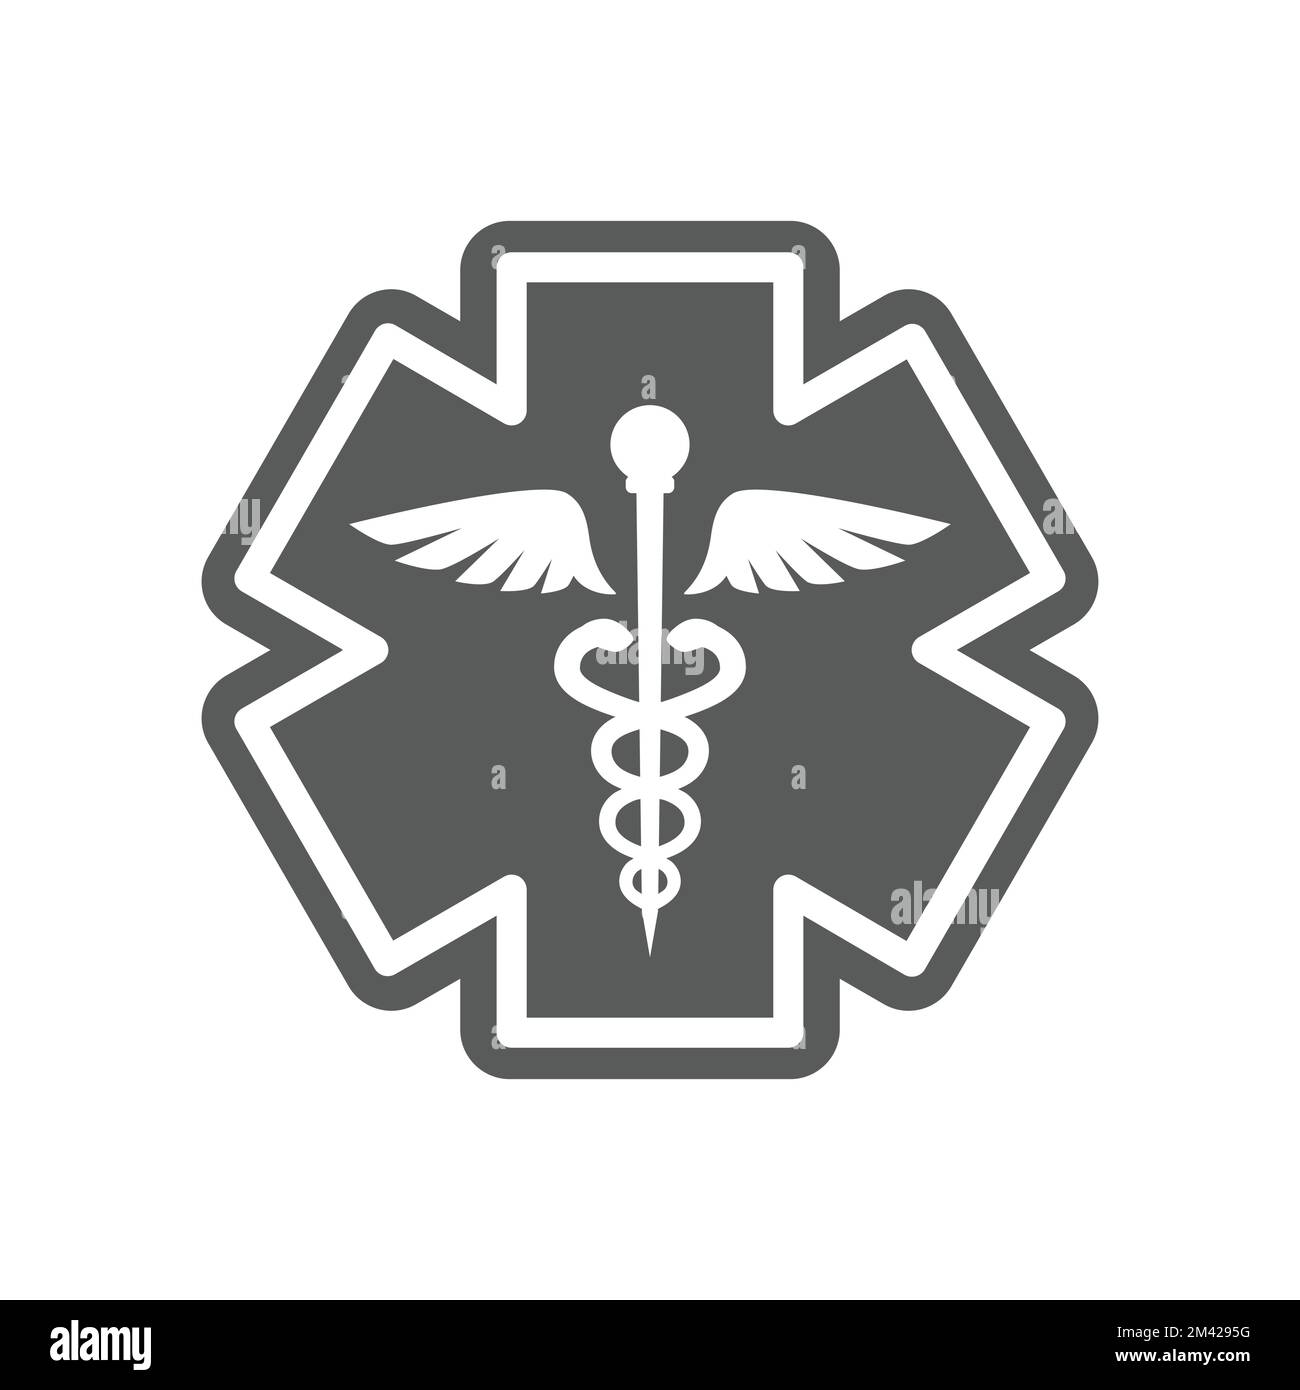 First aid, medical emergency vector symbol. Rod of asclepius or aesculapius, Caduceus with snake, ems, er icon. Stock Vector